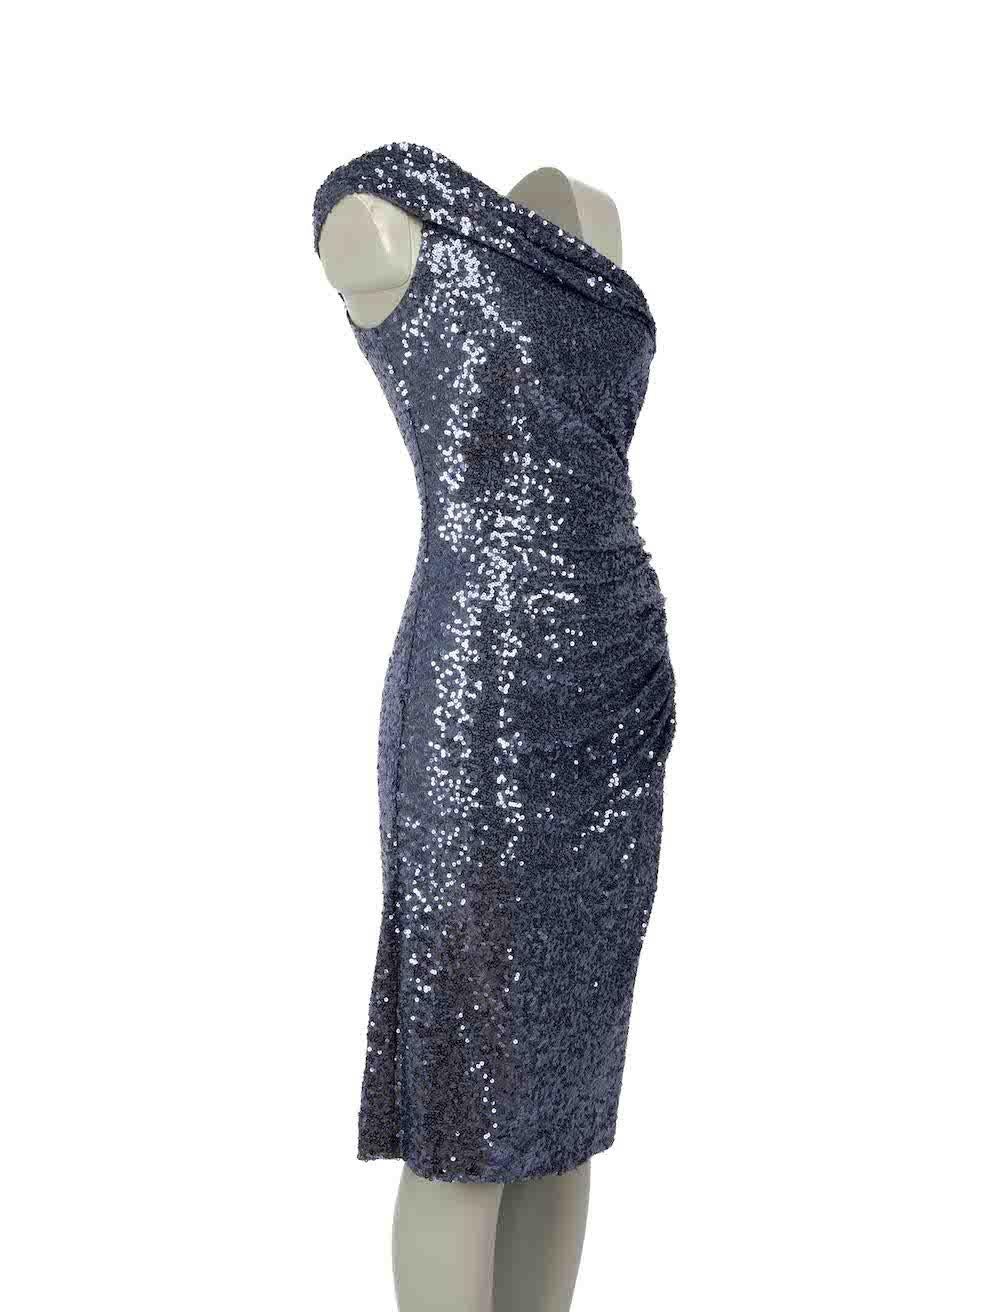 CONDITION is Never worn, with tags. No visible wear to dress is evident on this new Badgley Mischka designer resale item.
 
Details
Blue
Synthetic
Midi dress
Sequinned accent
One shoulder
Side zip closure with hook and eye
 
Made in China
